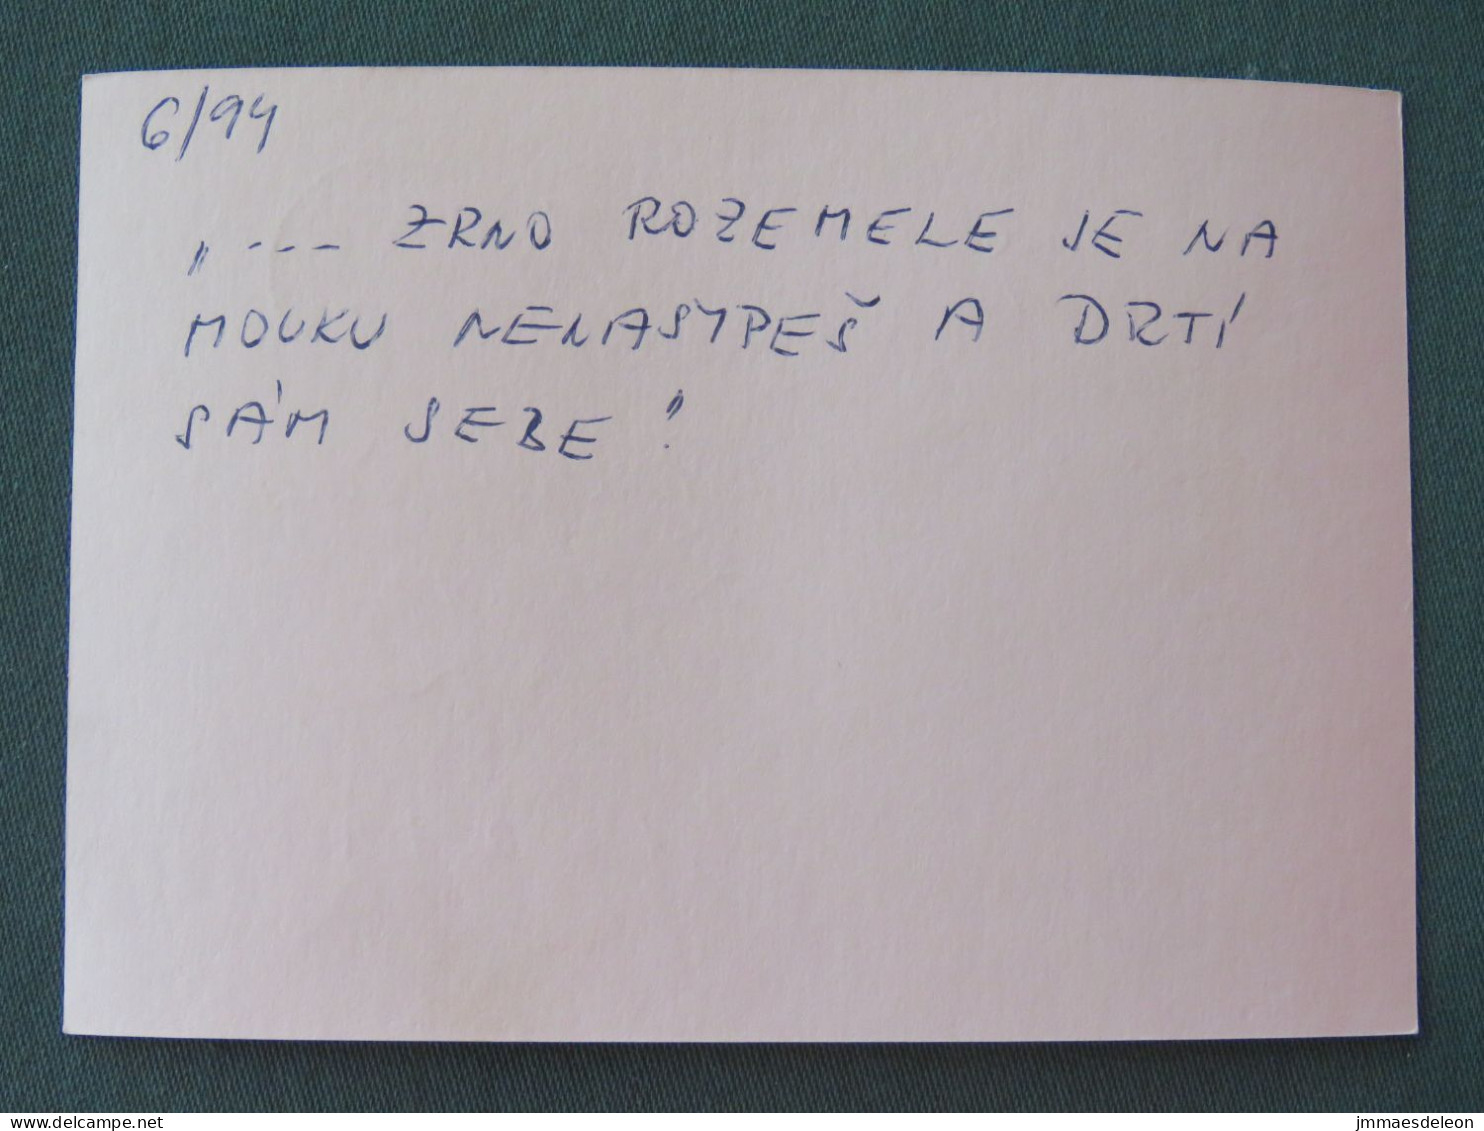 Czech Republic 1994 Stationery Postcard Hora Rip Mountain Sent Locally From Prague, Avocado (?) Slogan - Lettres & Documents